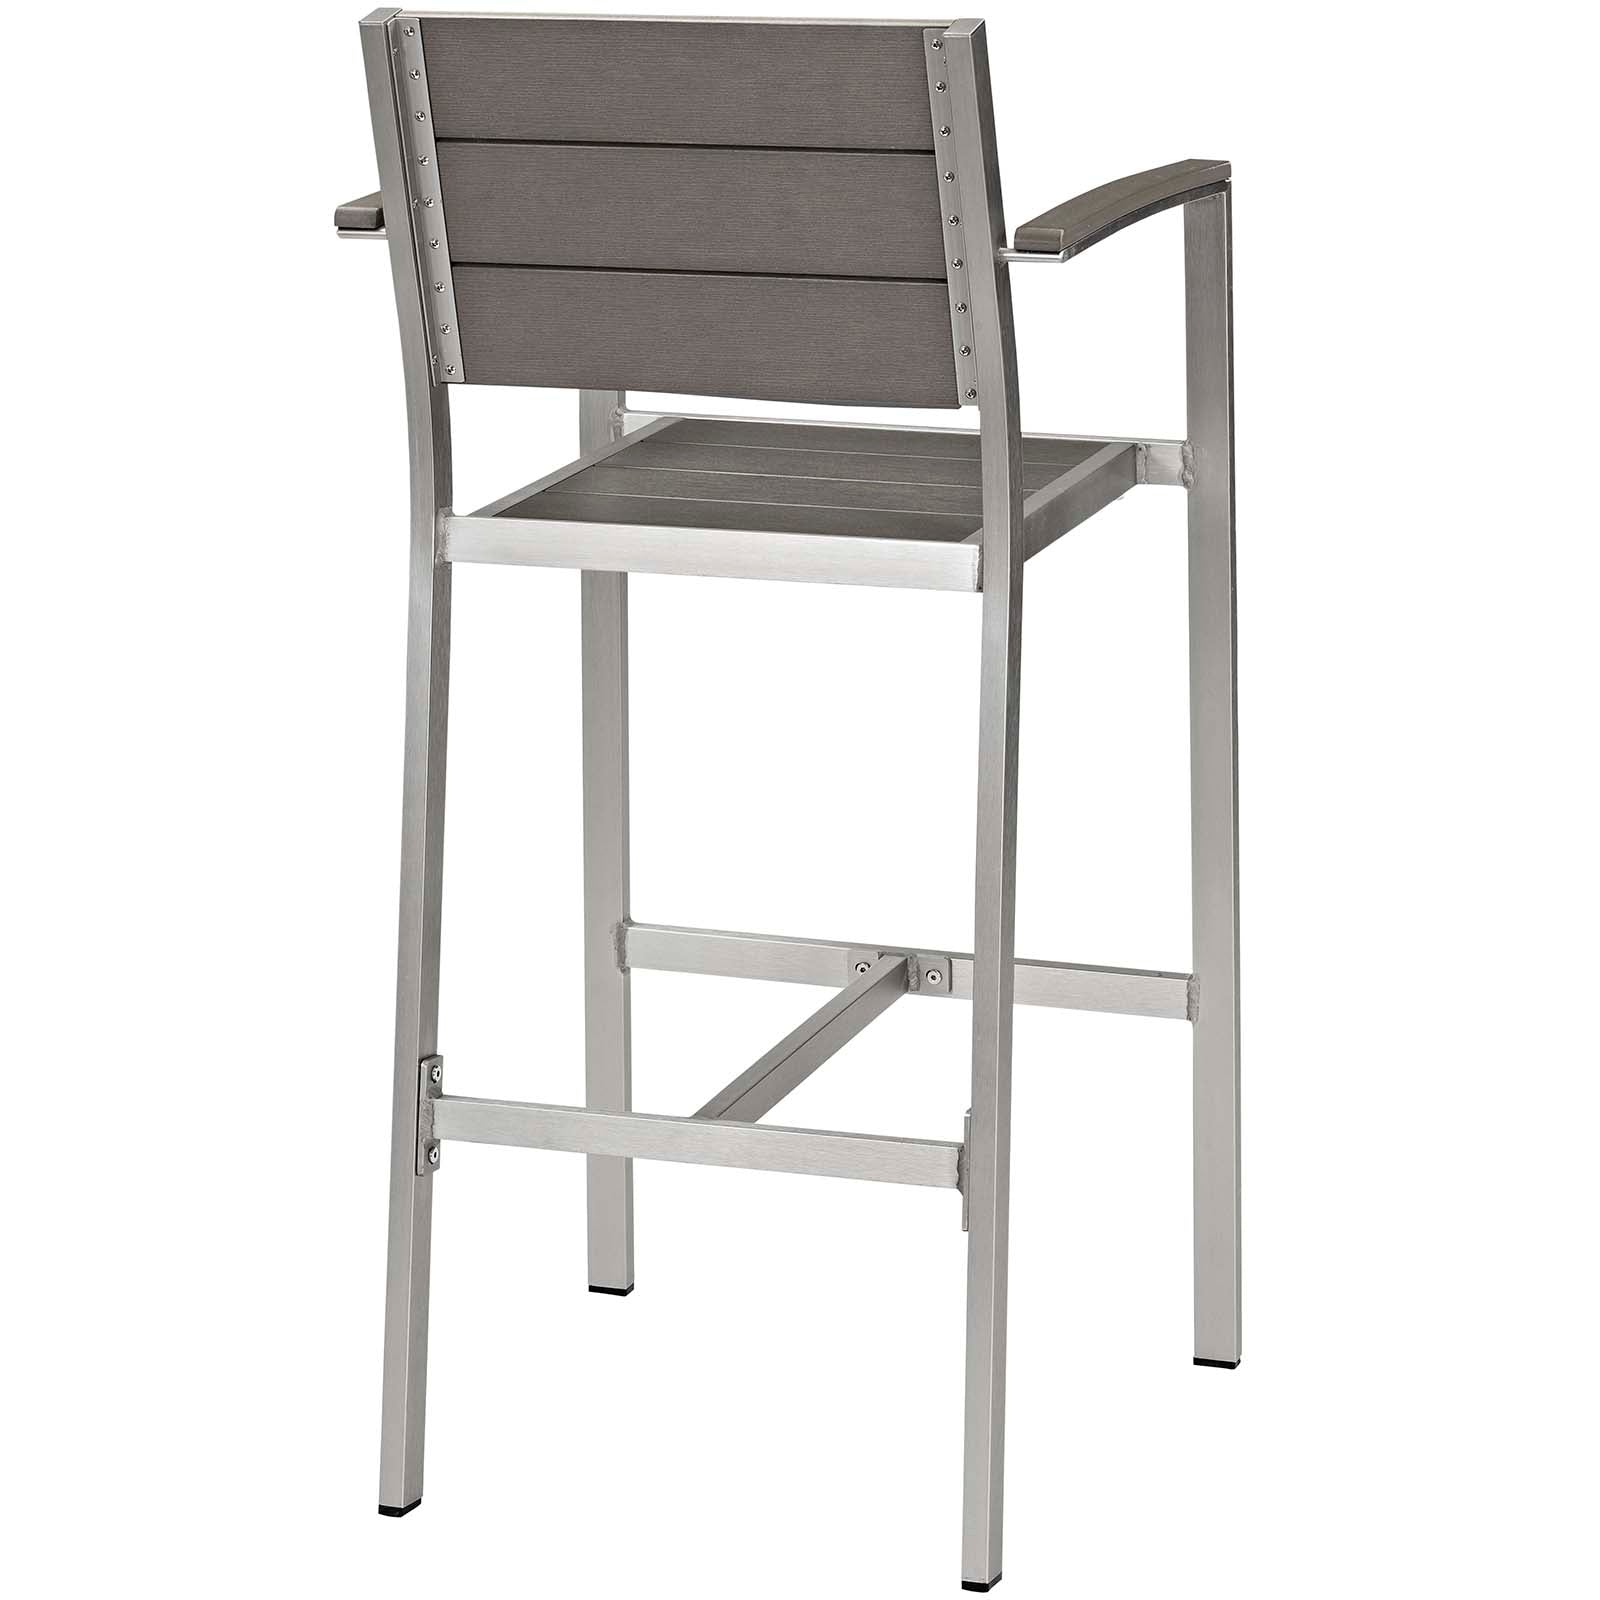 Modway Outdoor Dining Sets - Shore 20" Outdoor Pub Set for 2 Silver & Gray